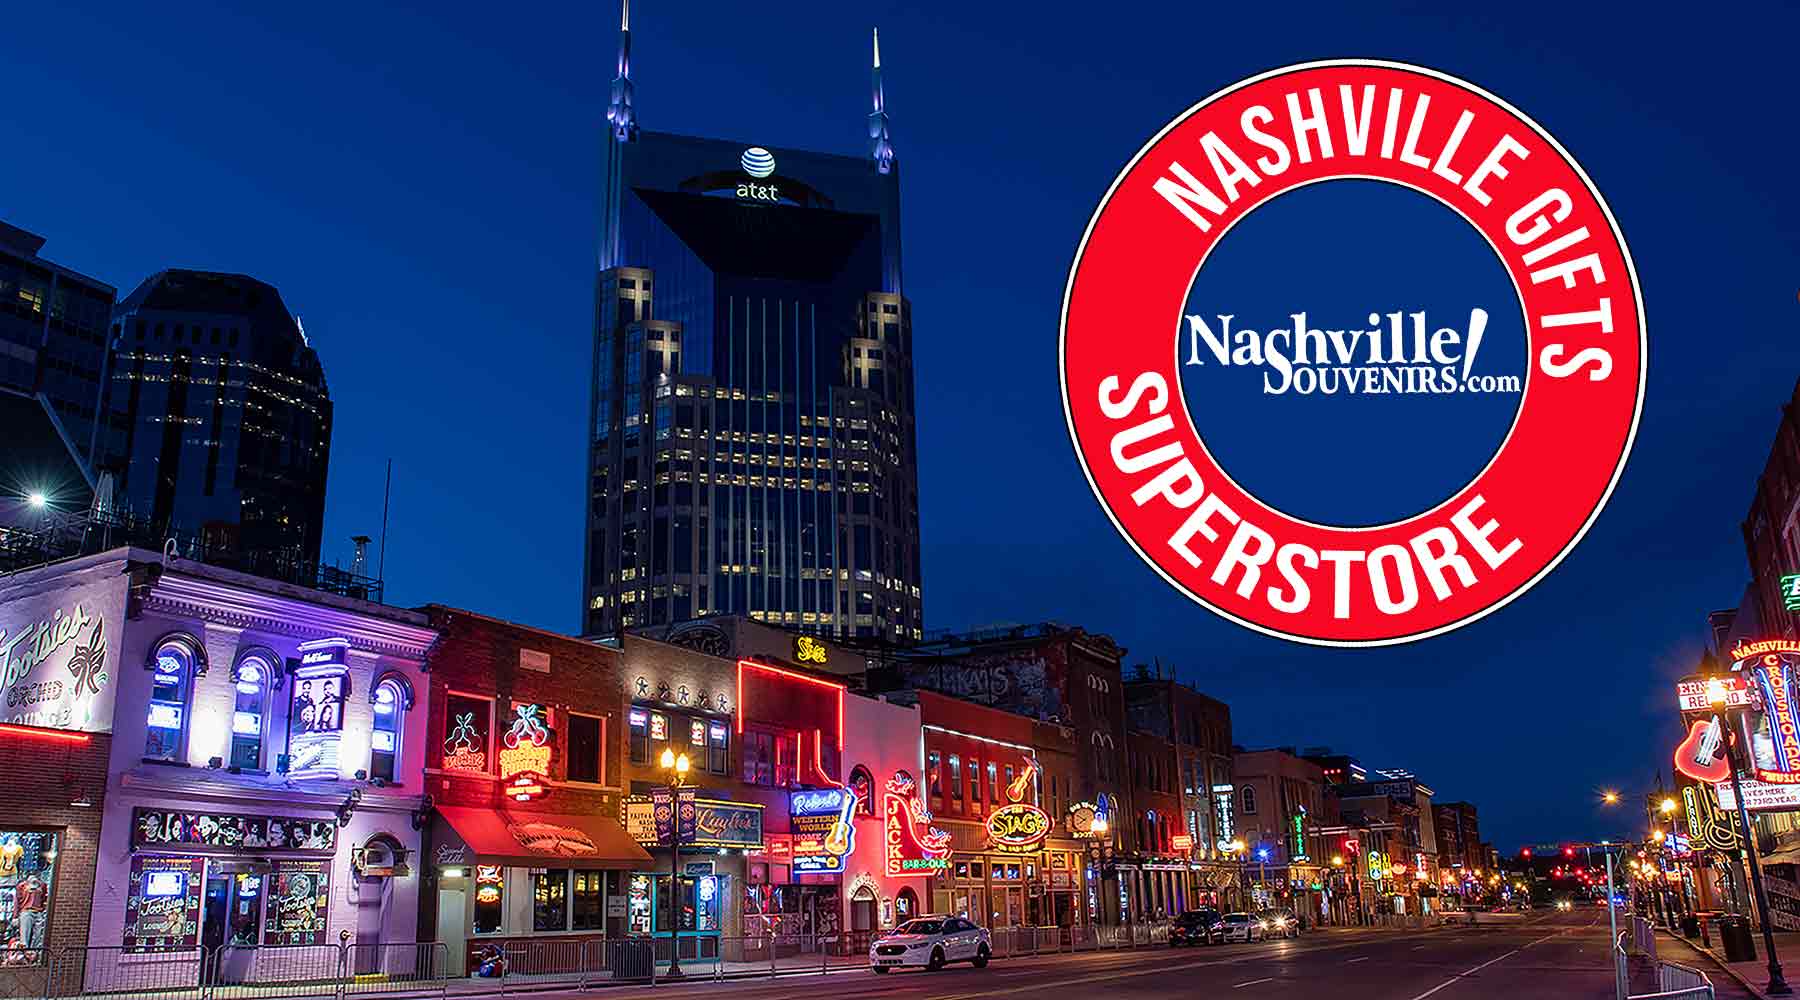 NashvilleSouvenirs.com is your online source for over 43 years selling Nashville, Jack Daniel's and Country Music related gift ideas!